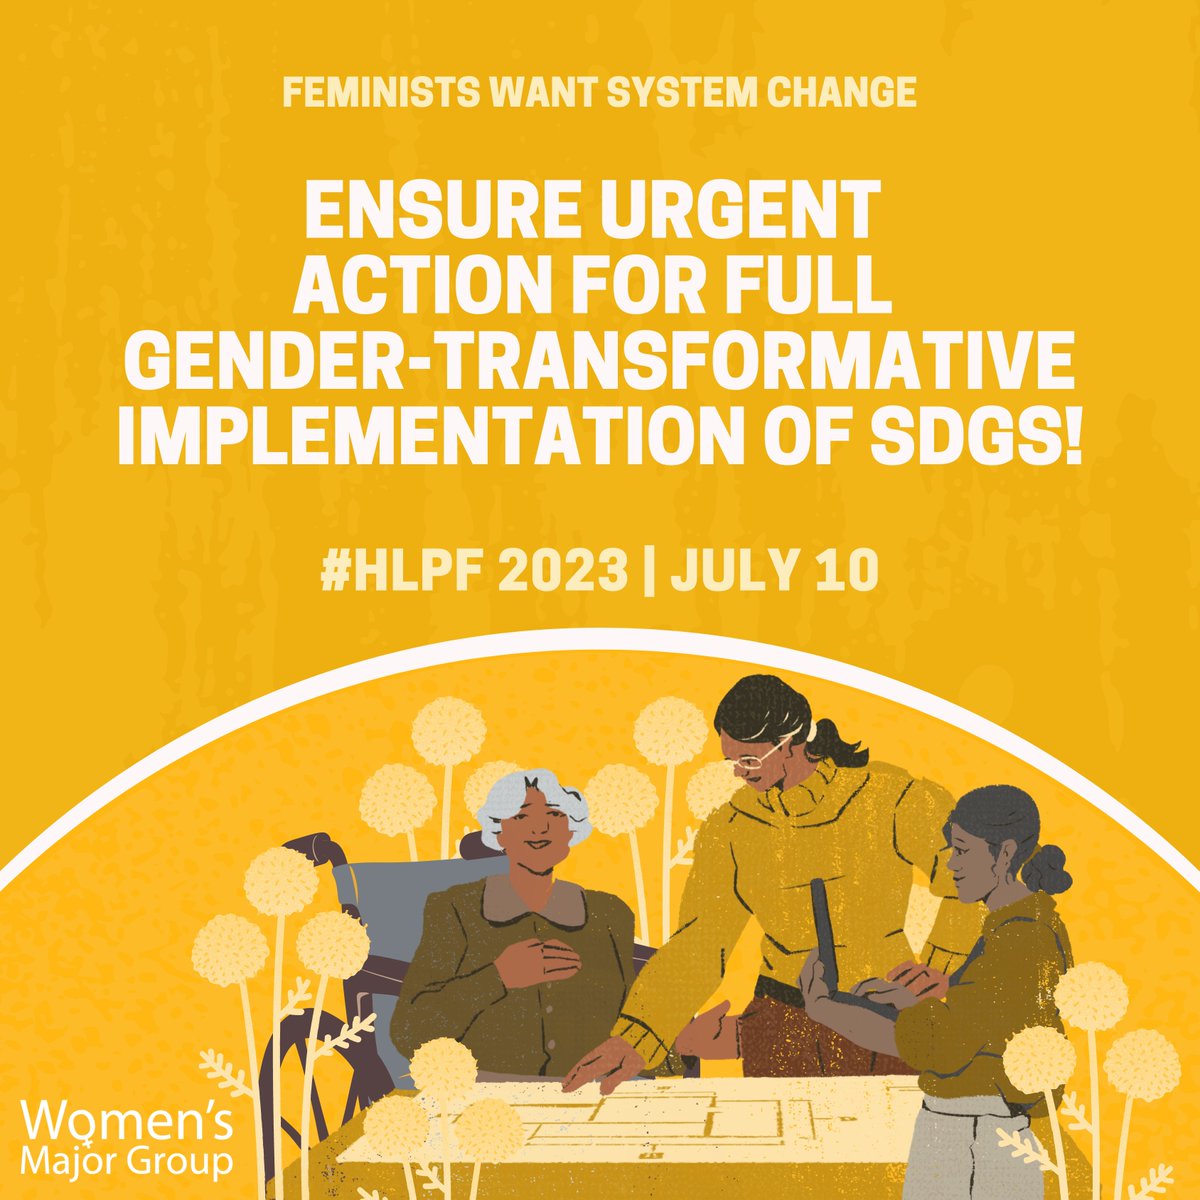 📢 Now is the time to focus on immediate action for full implementation of #SDGs, before rushing to create new frameworks that override our existing agreements. #HLPF #FeministsWantSystemChange #ActNow